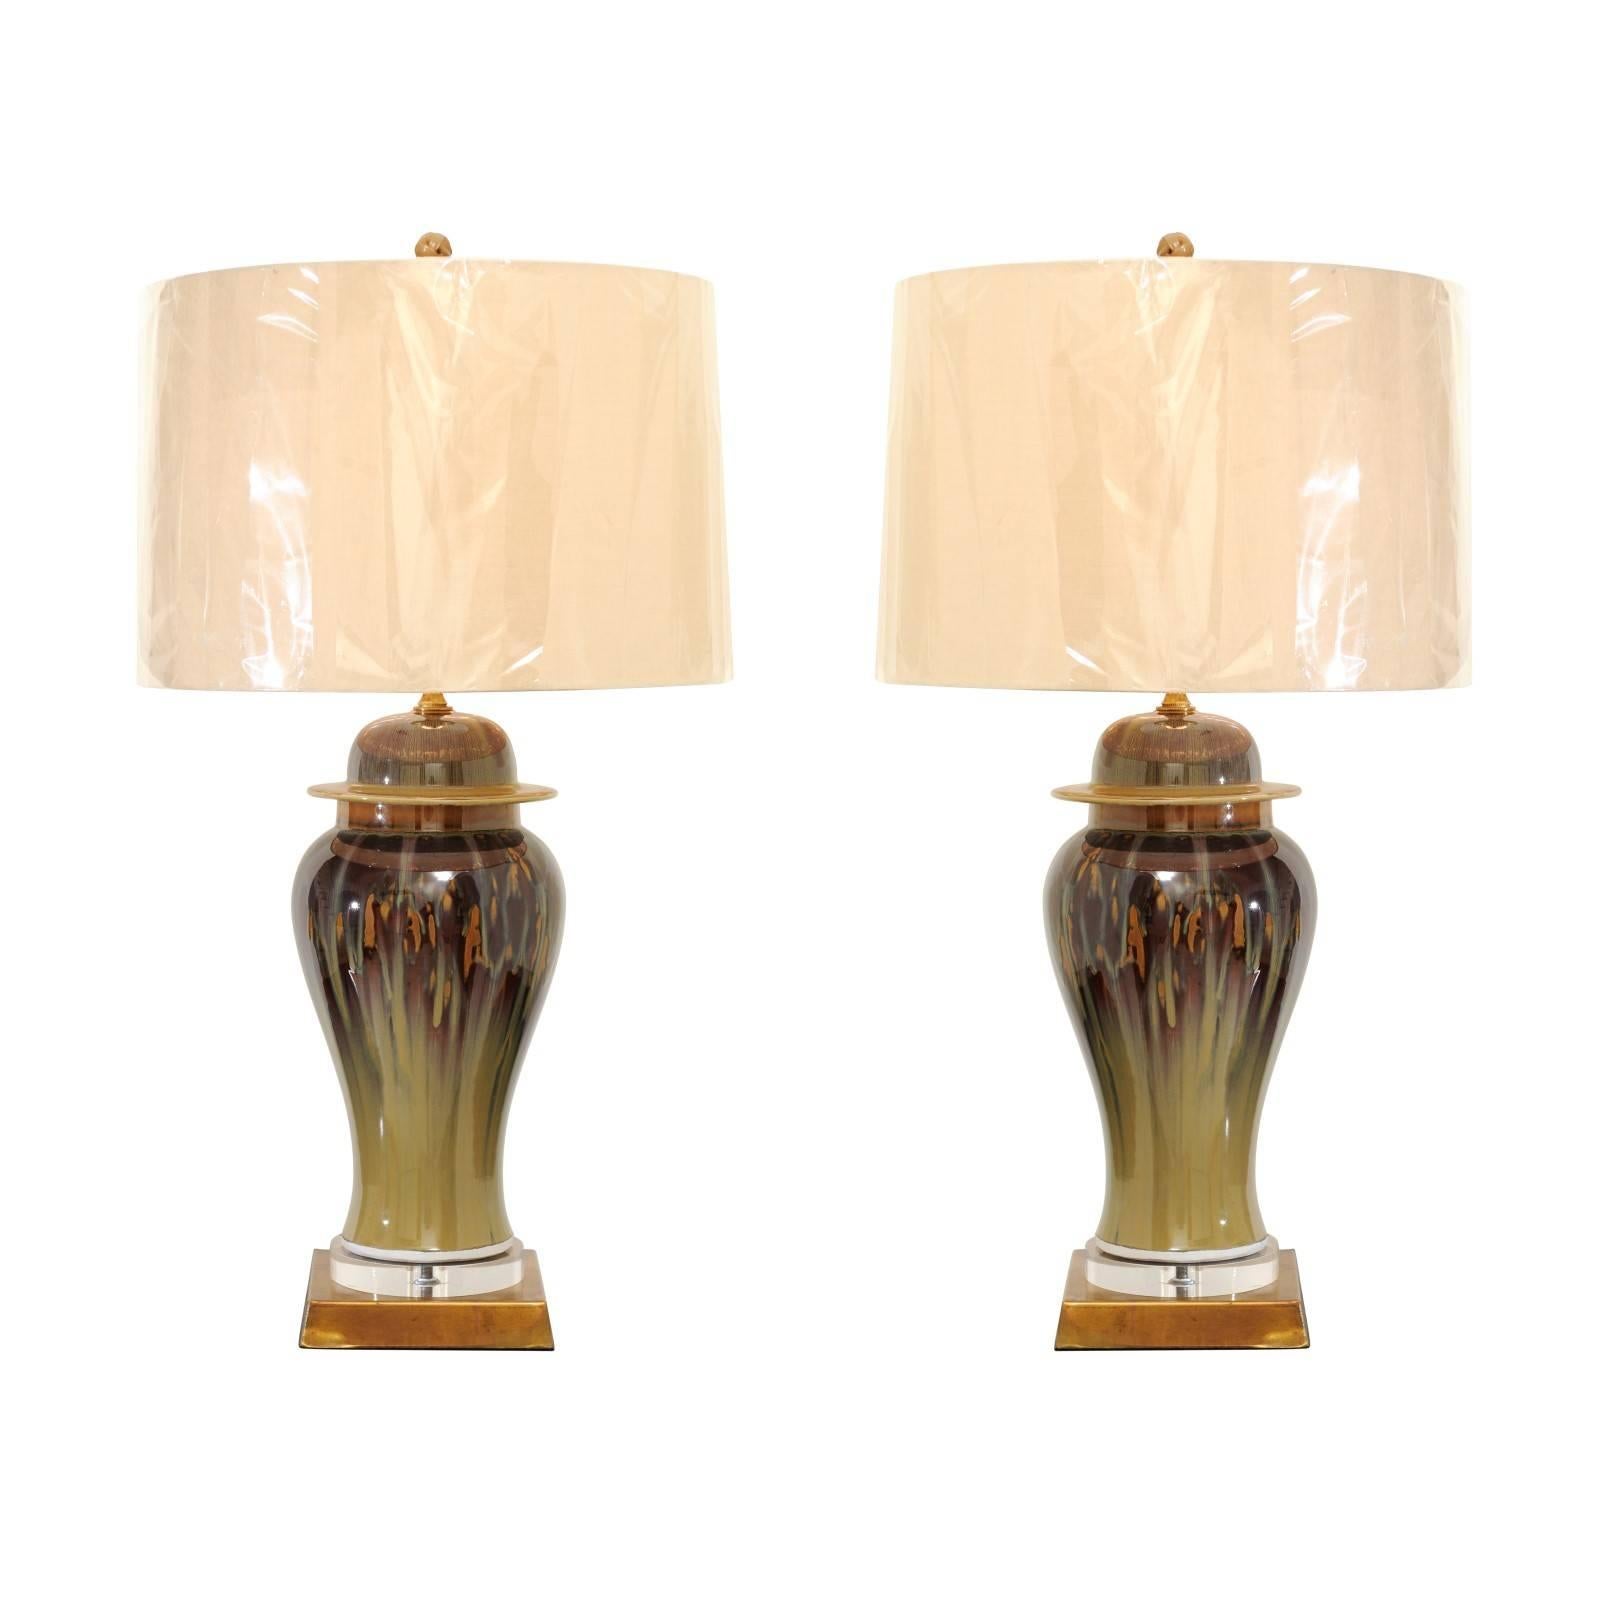 Pair of Custom Drip Glaze Lamps in Moss, Oxblood and Yellow Ochre